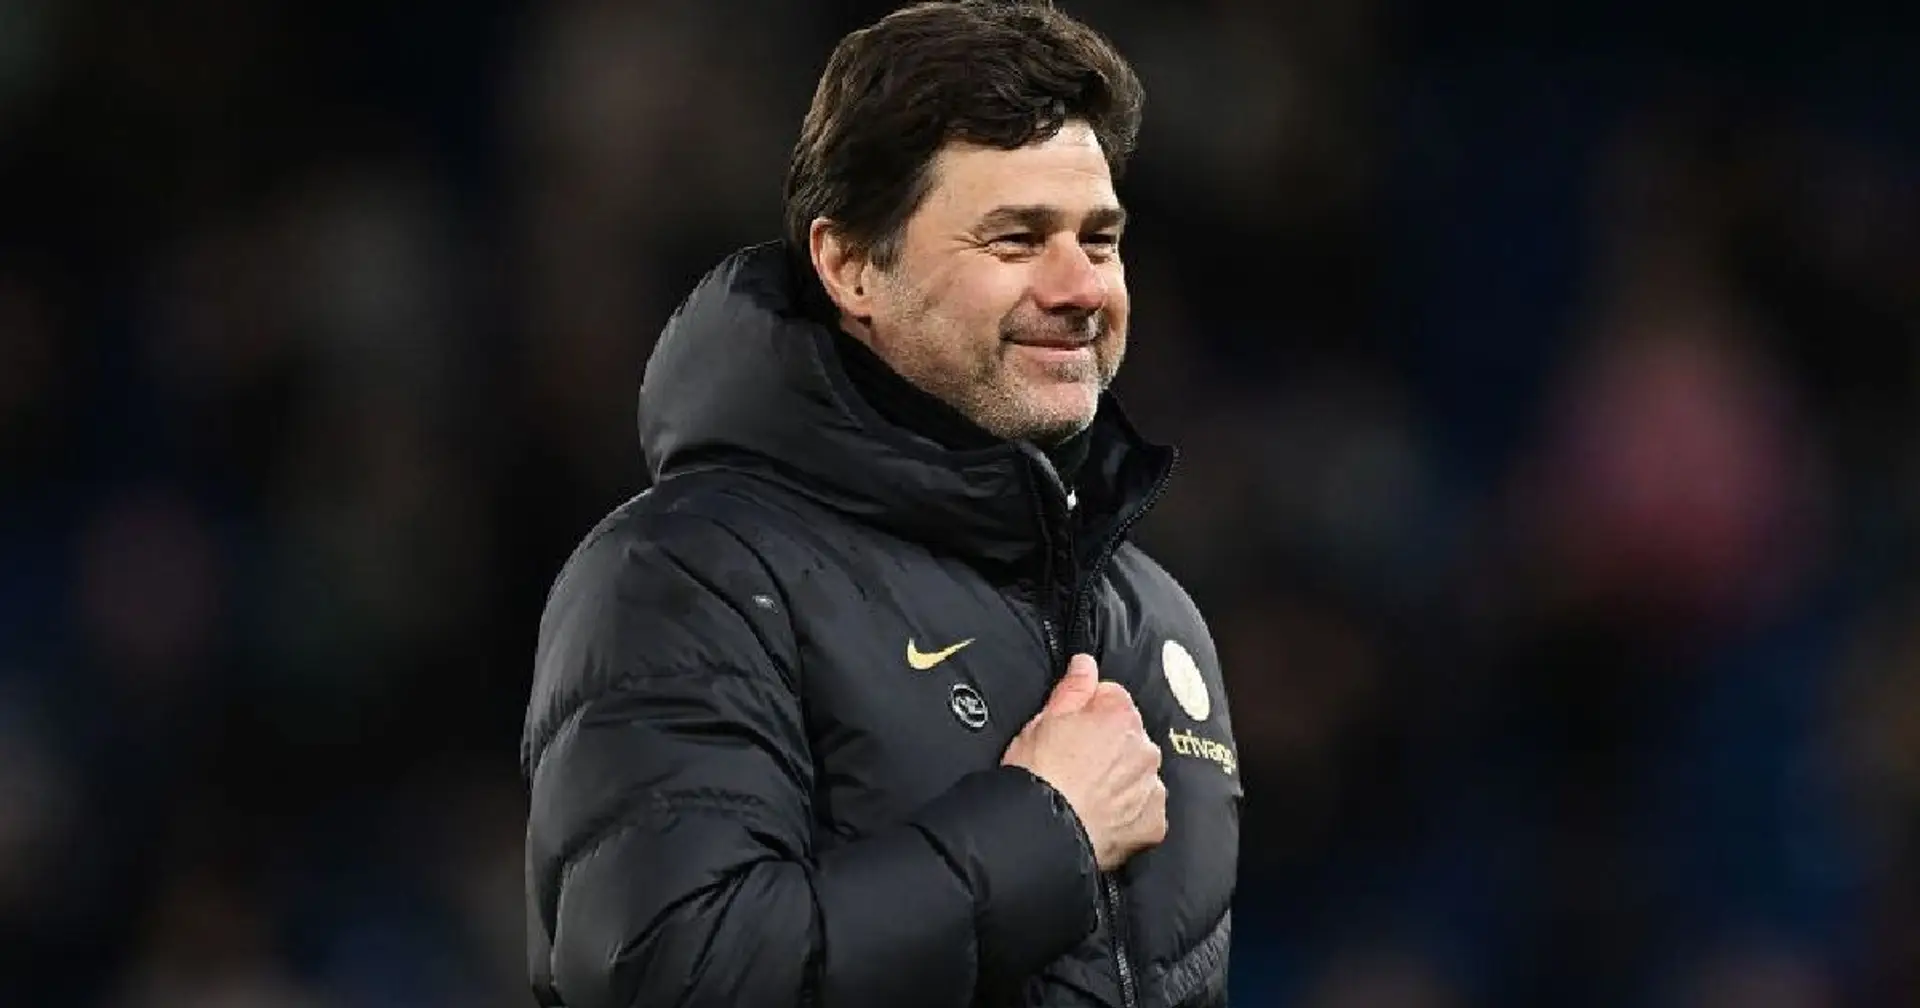 'I cannot hide my emotion for the club and I think it is going to be emotional': Pochettino on facing his former side